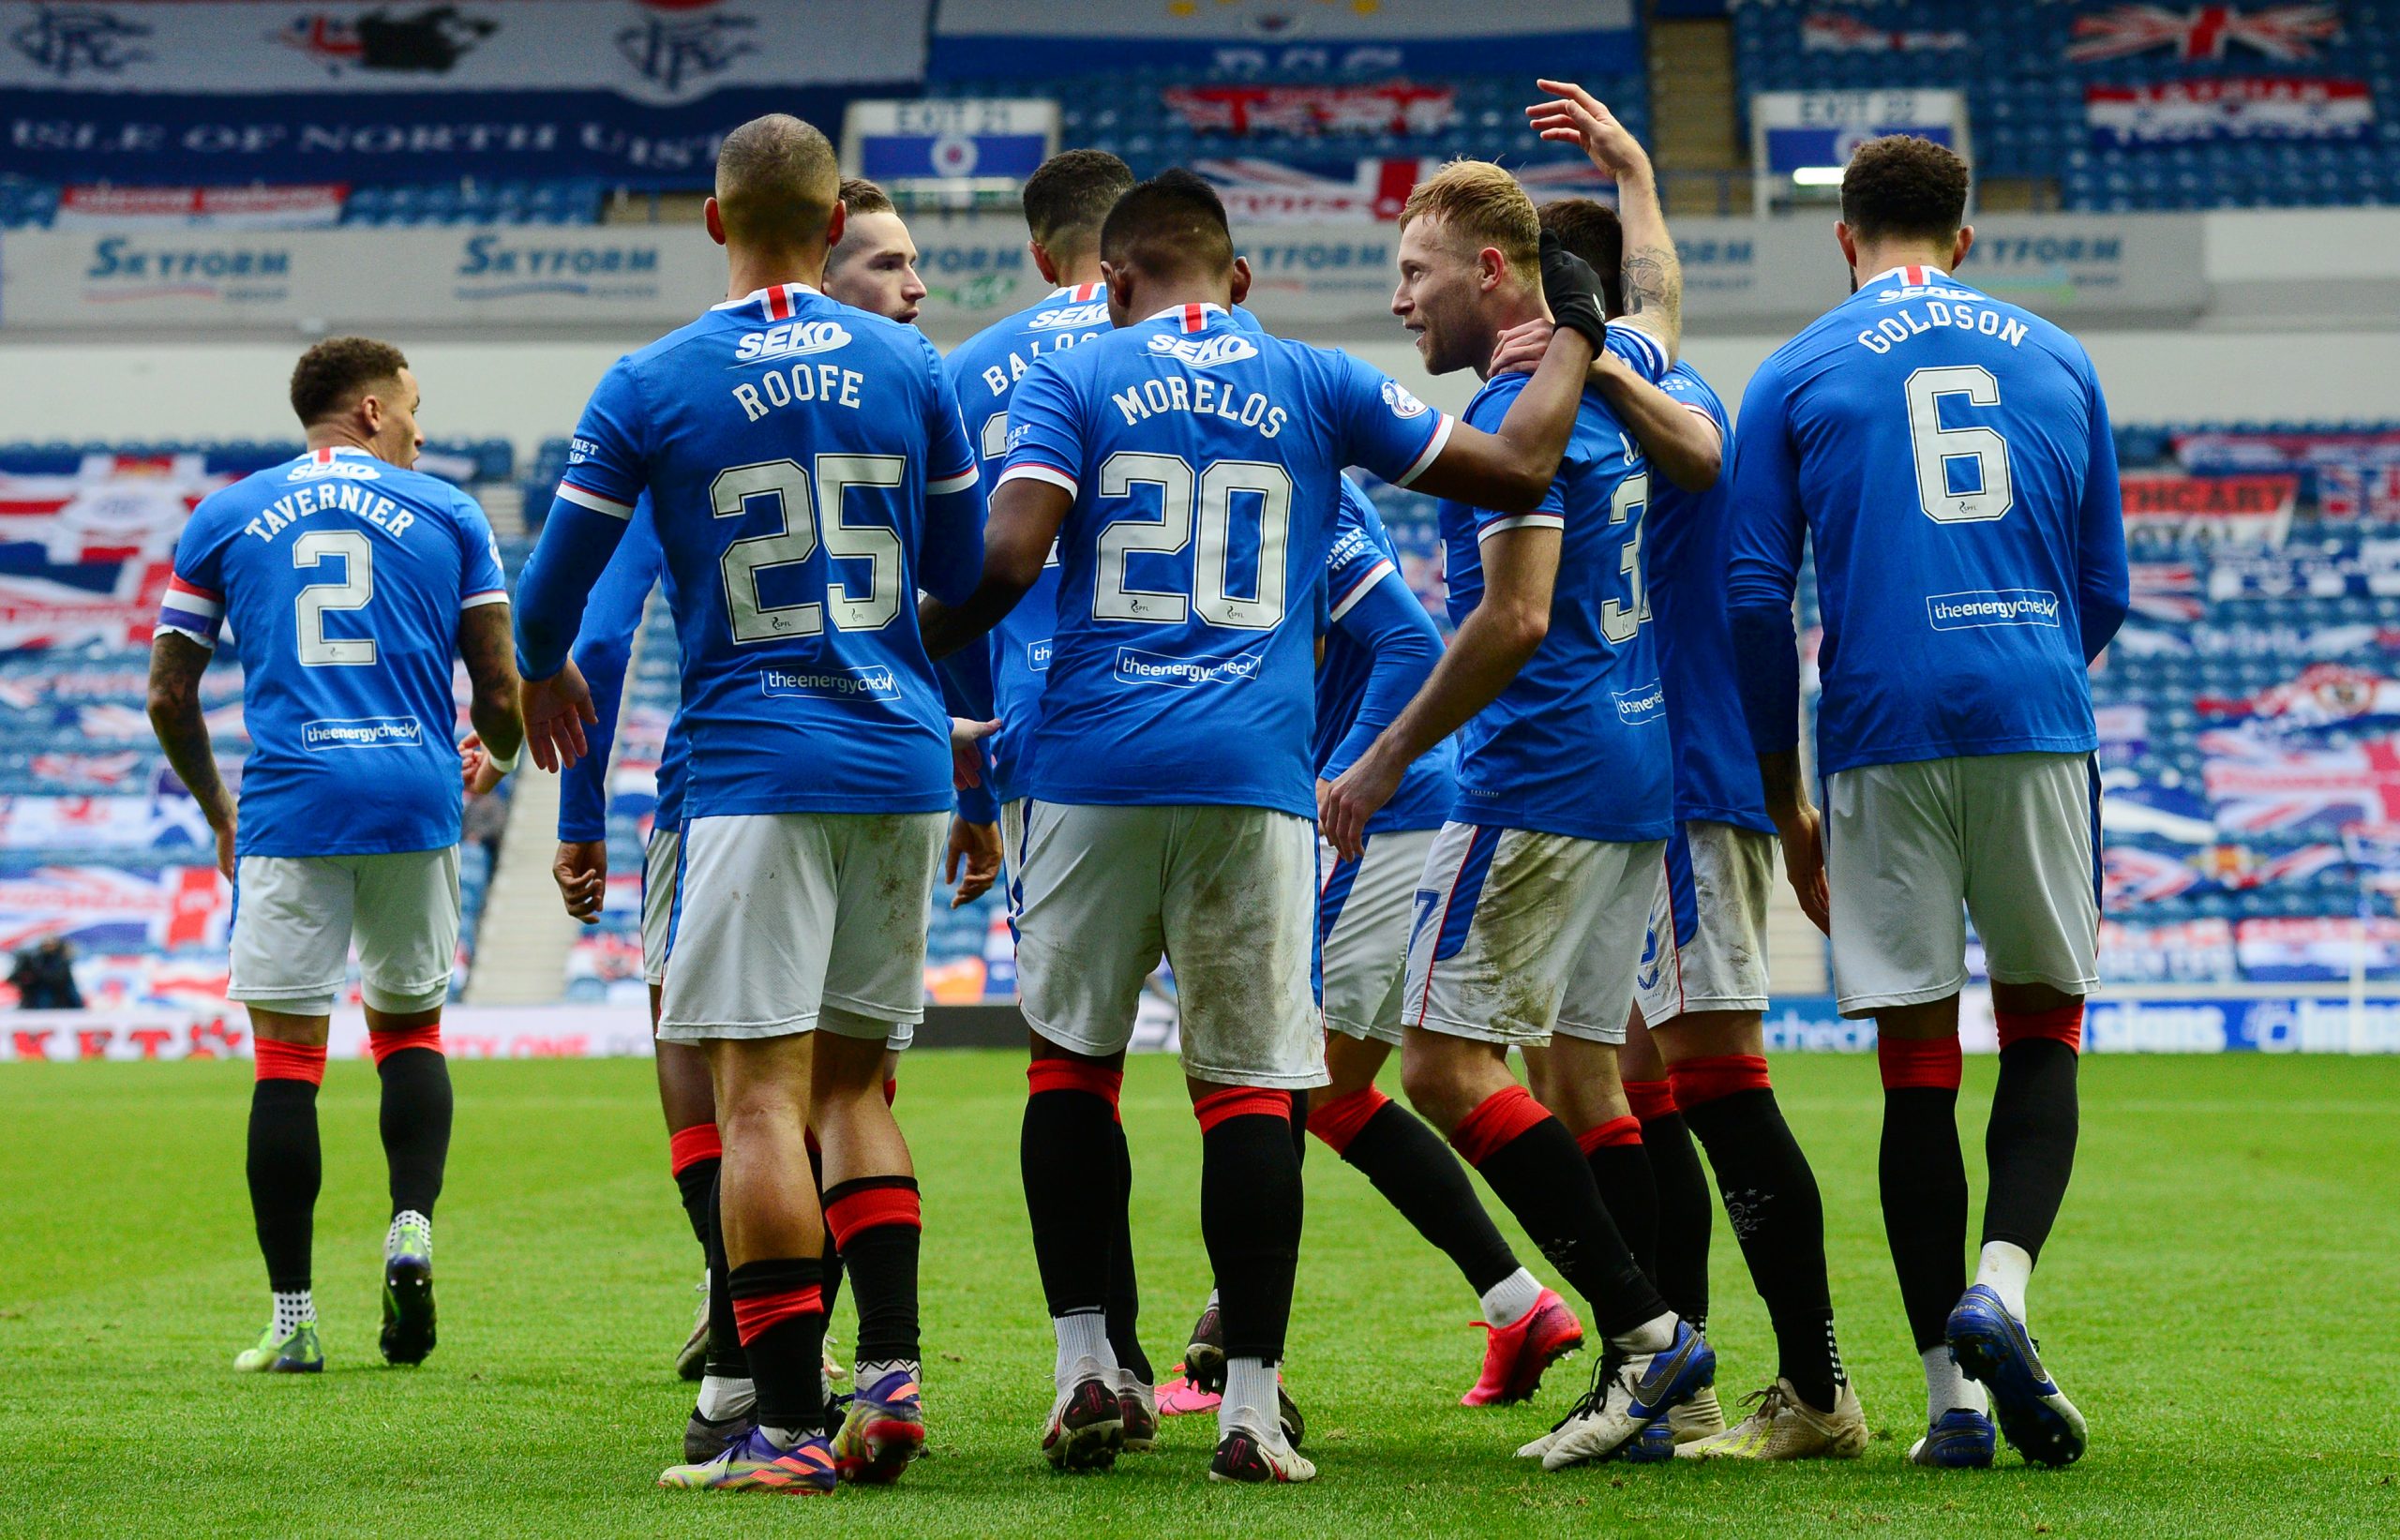 Ranking Rangers’ Four Attacking Summer Signings - Rangers celebrate